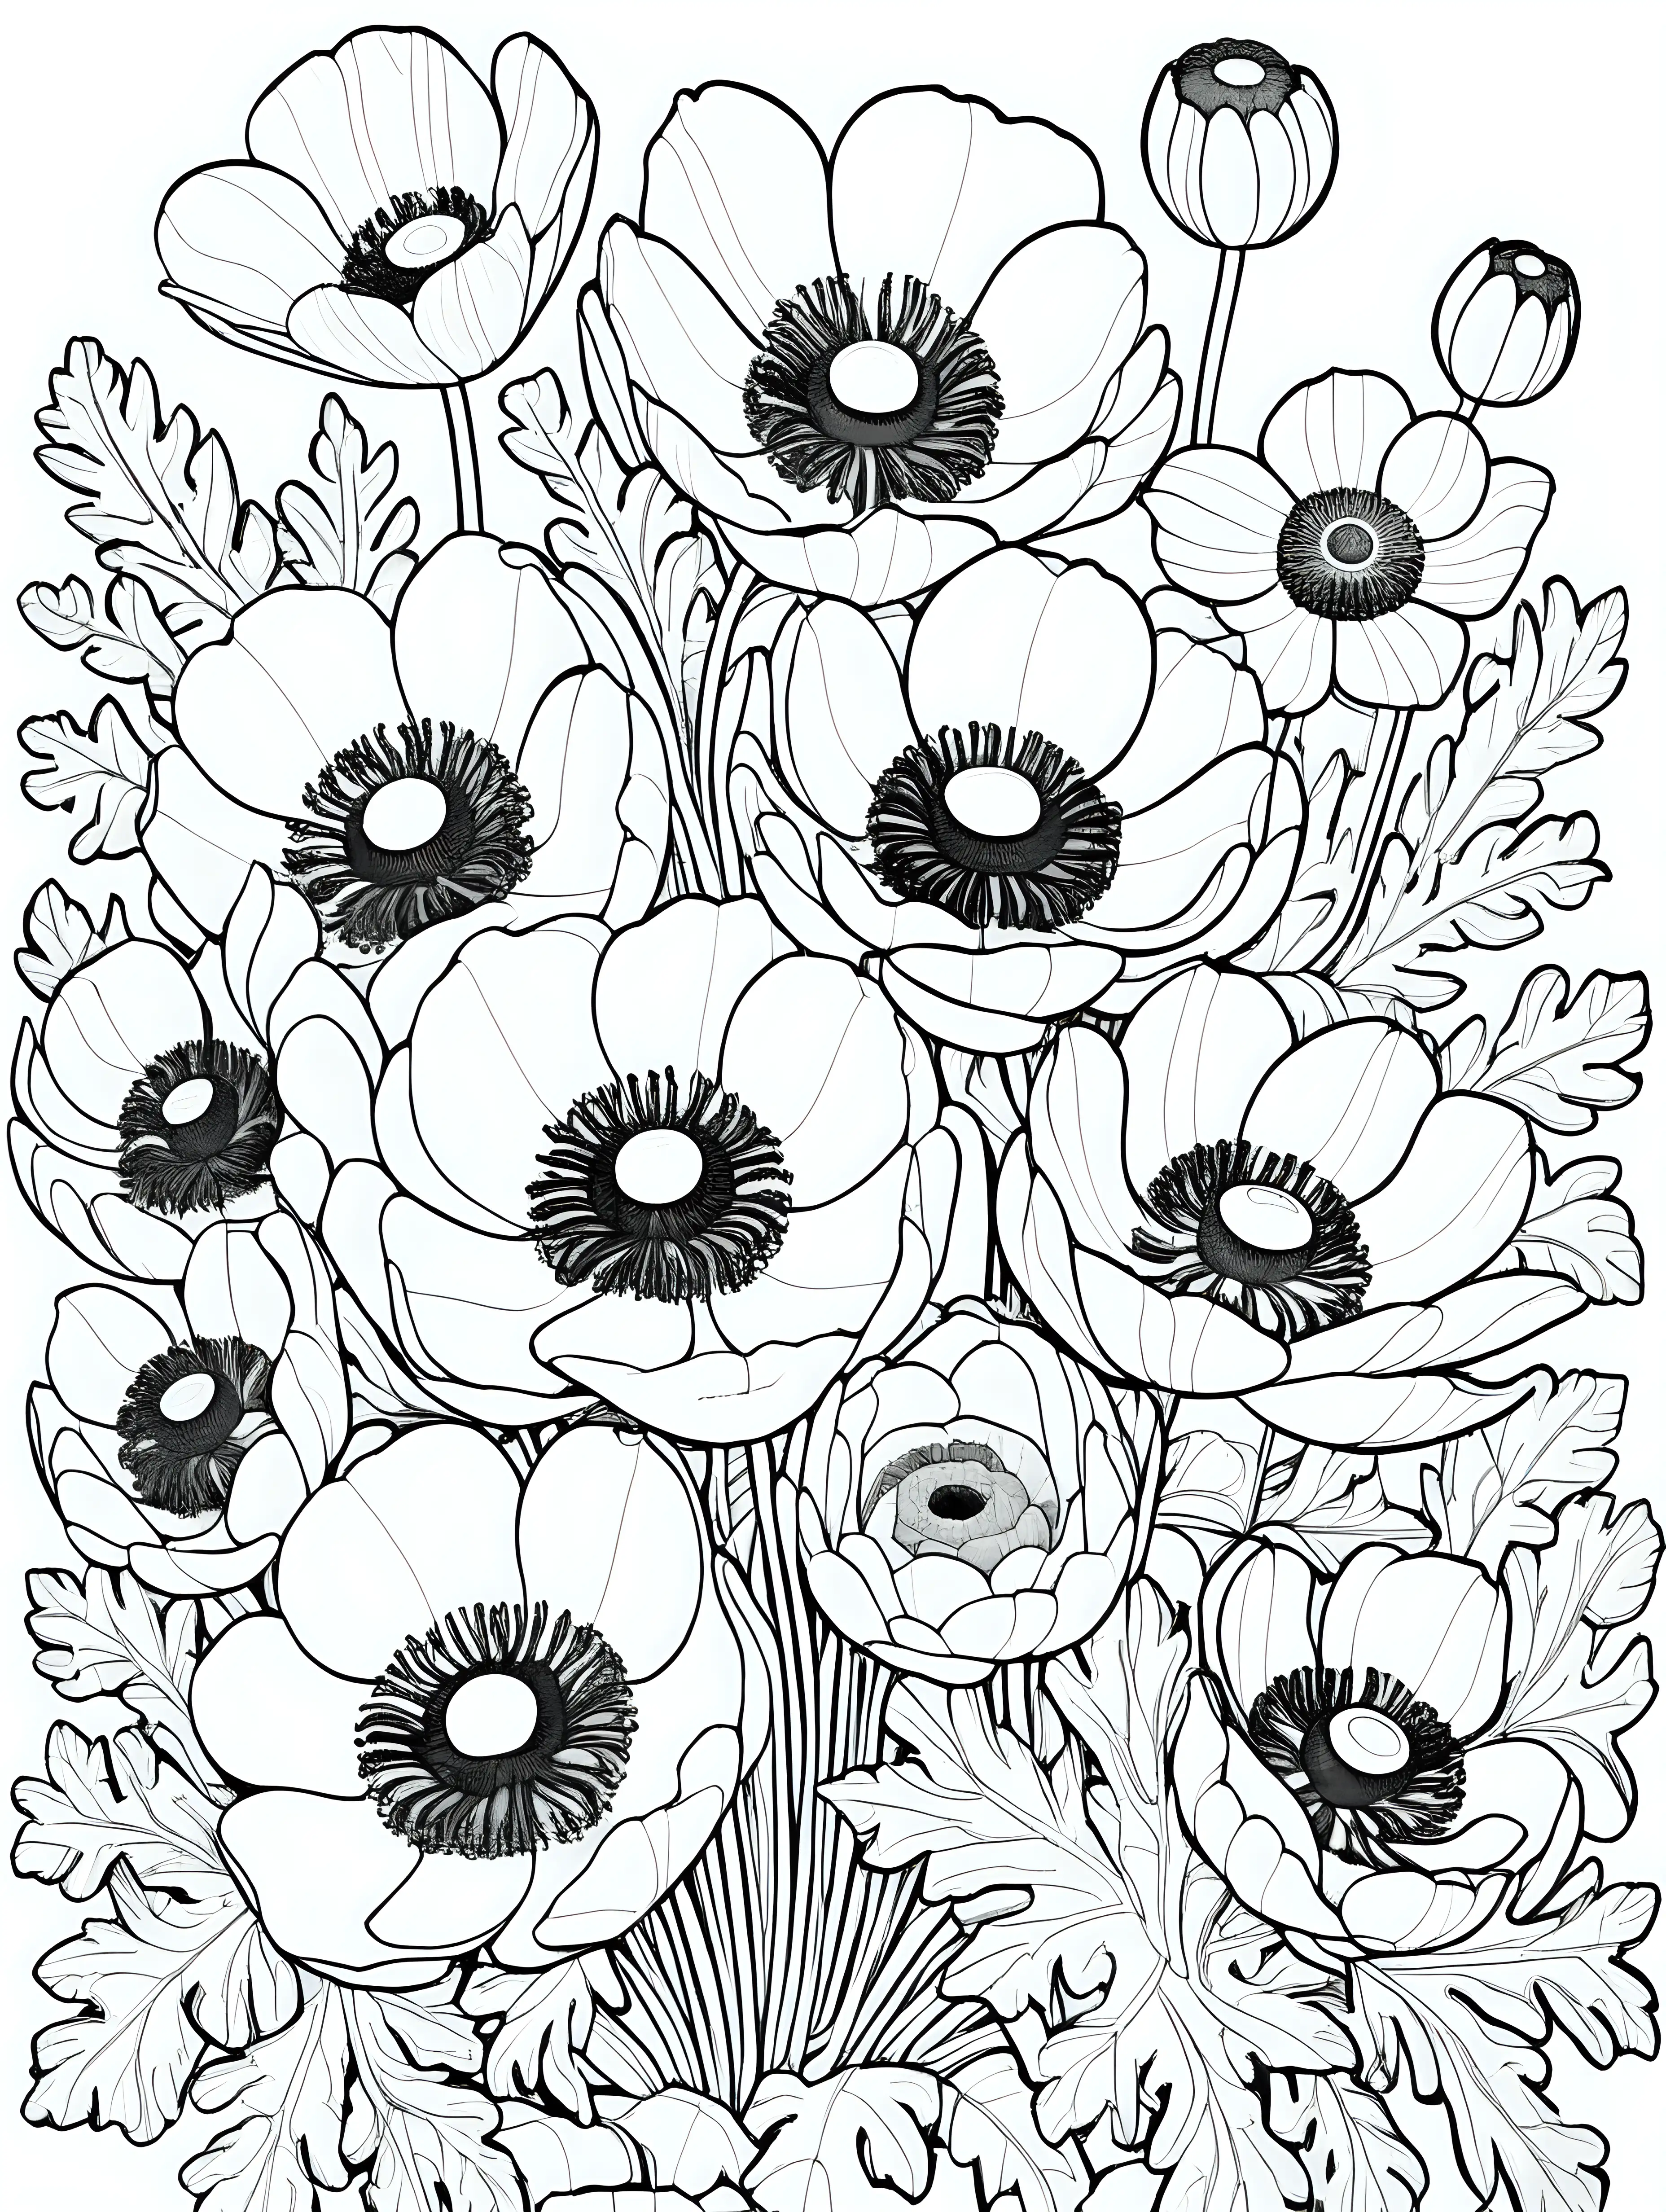 Cartoon Style Black and White Anemone Flower Coloring Page